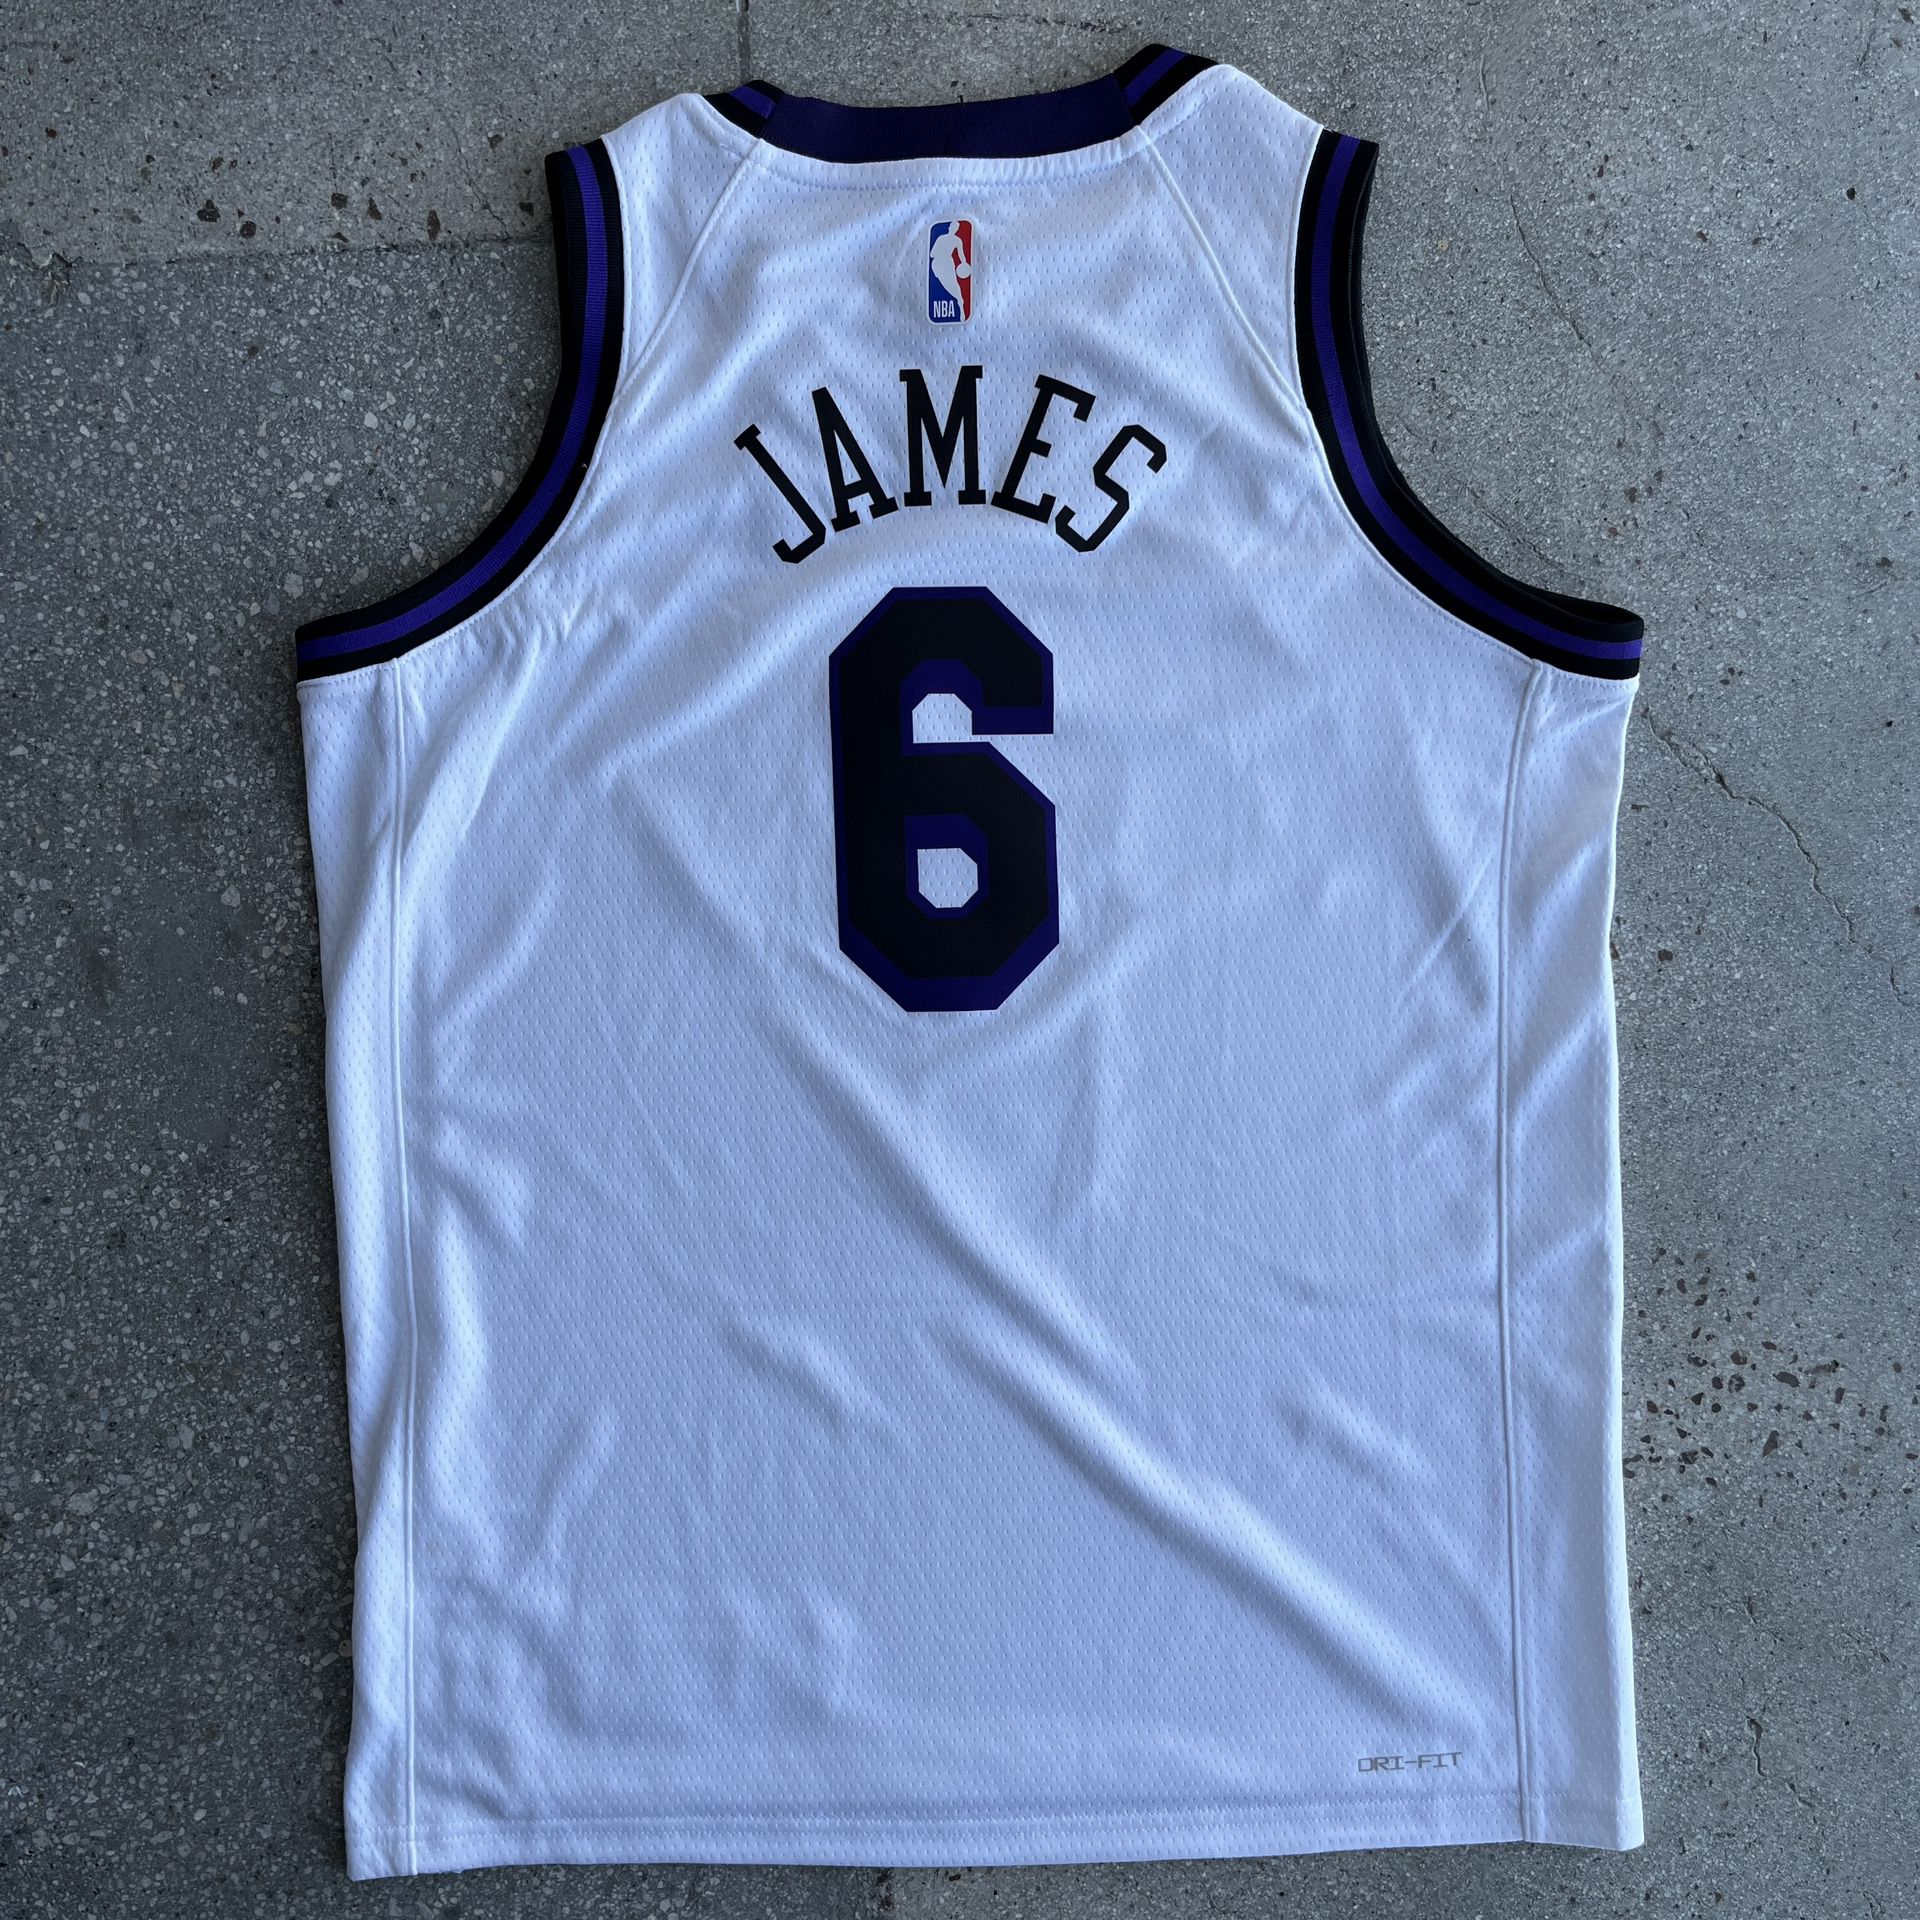 BRAND NEW! LeBron James #23 Los Angeles Nike “MPLS Edition” NBA Jersey -  Size X-Large (XL) Meet Now or Ships Same Day! for Sale in Saint Paul, MN -  OfferUp